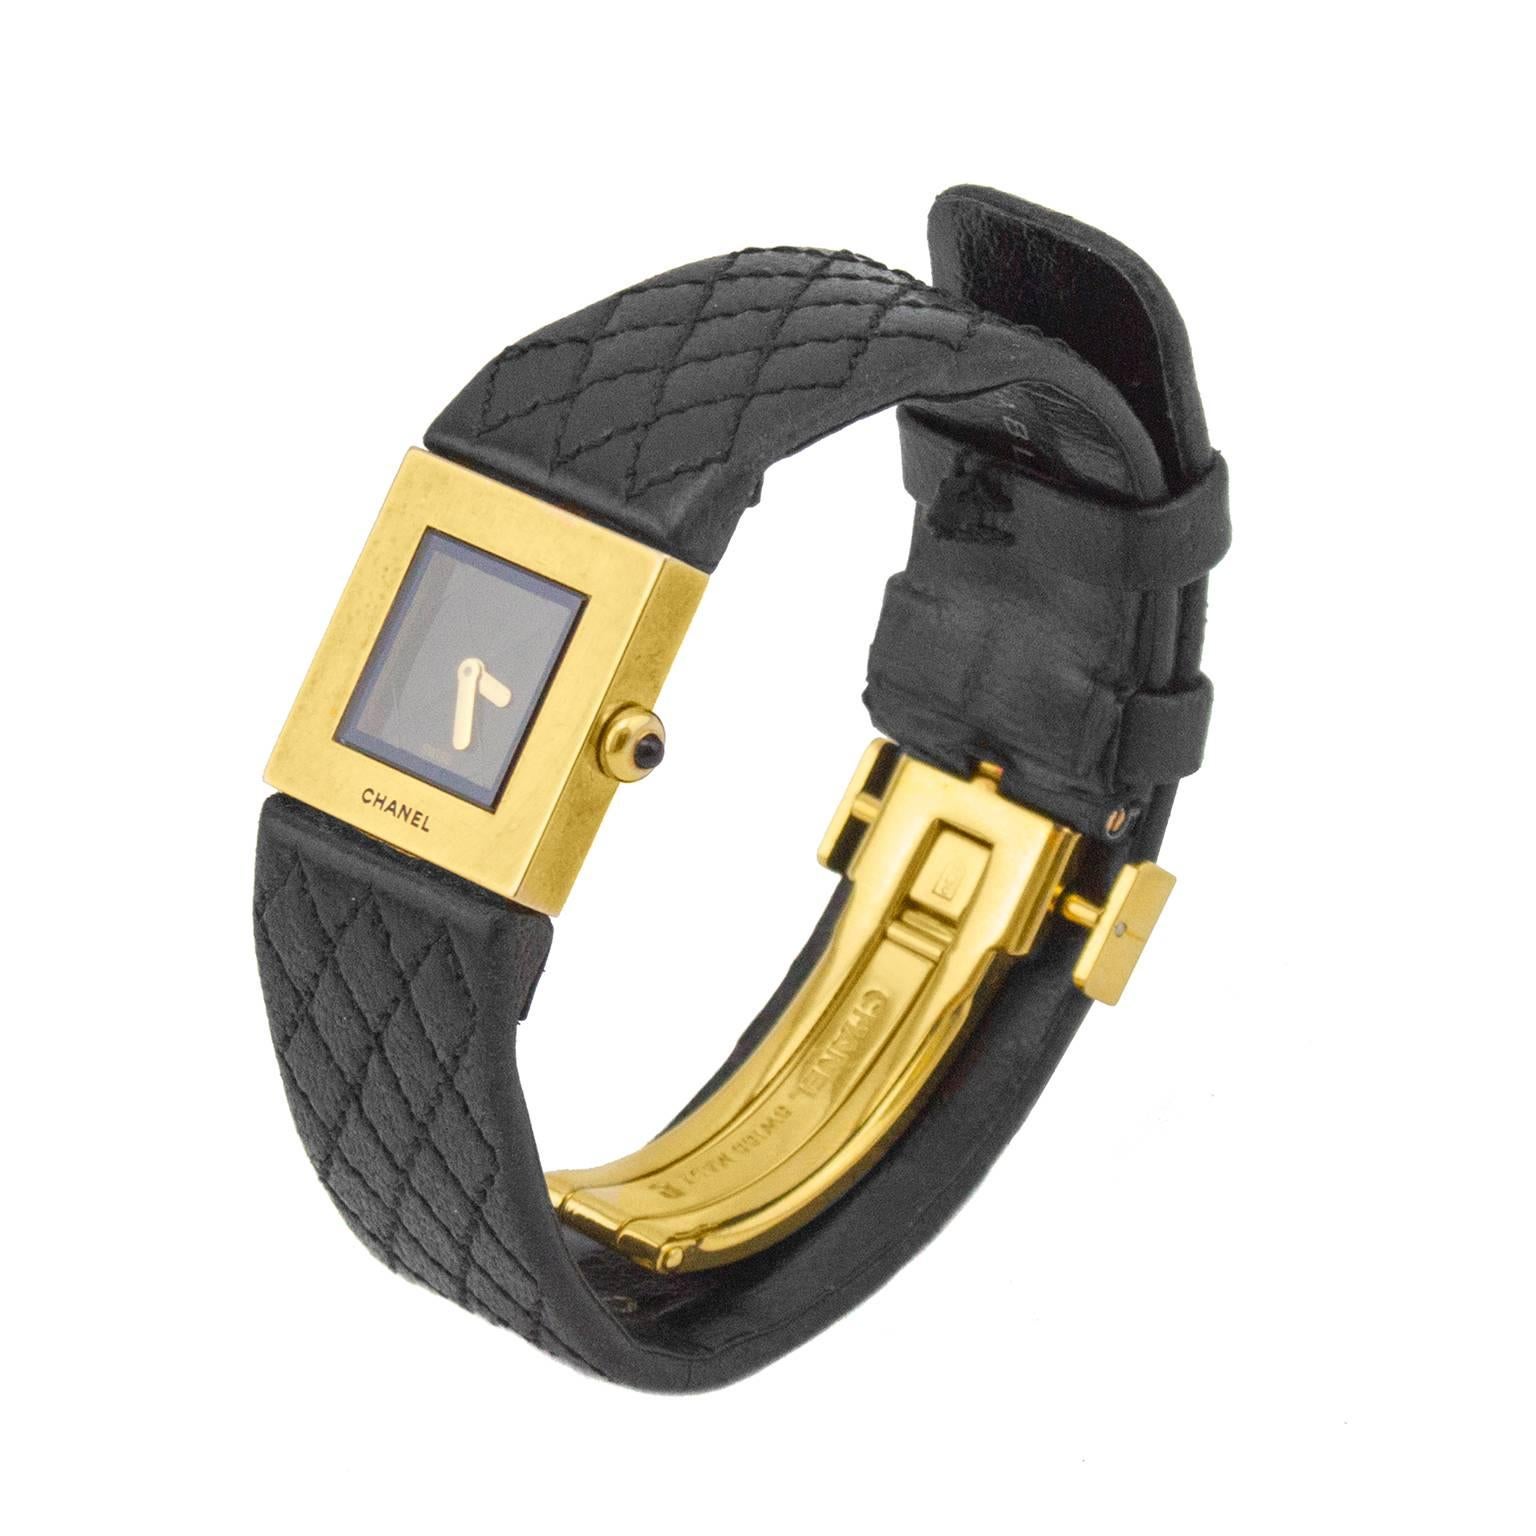 Chanel 18 karat gold and black leather quartz wrist watch dating from 1993. The epitome of understated elegance. Black square face with monochromatic quilted pattern. Stick gold hands, square gold smooth bezel, sapphire crystal face and gold